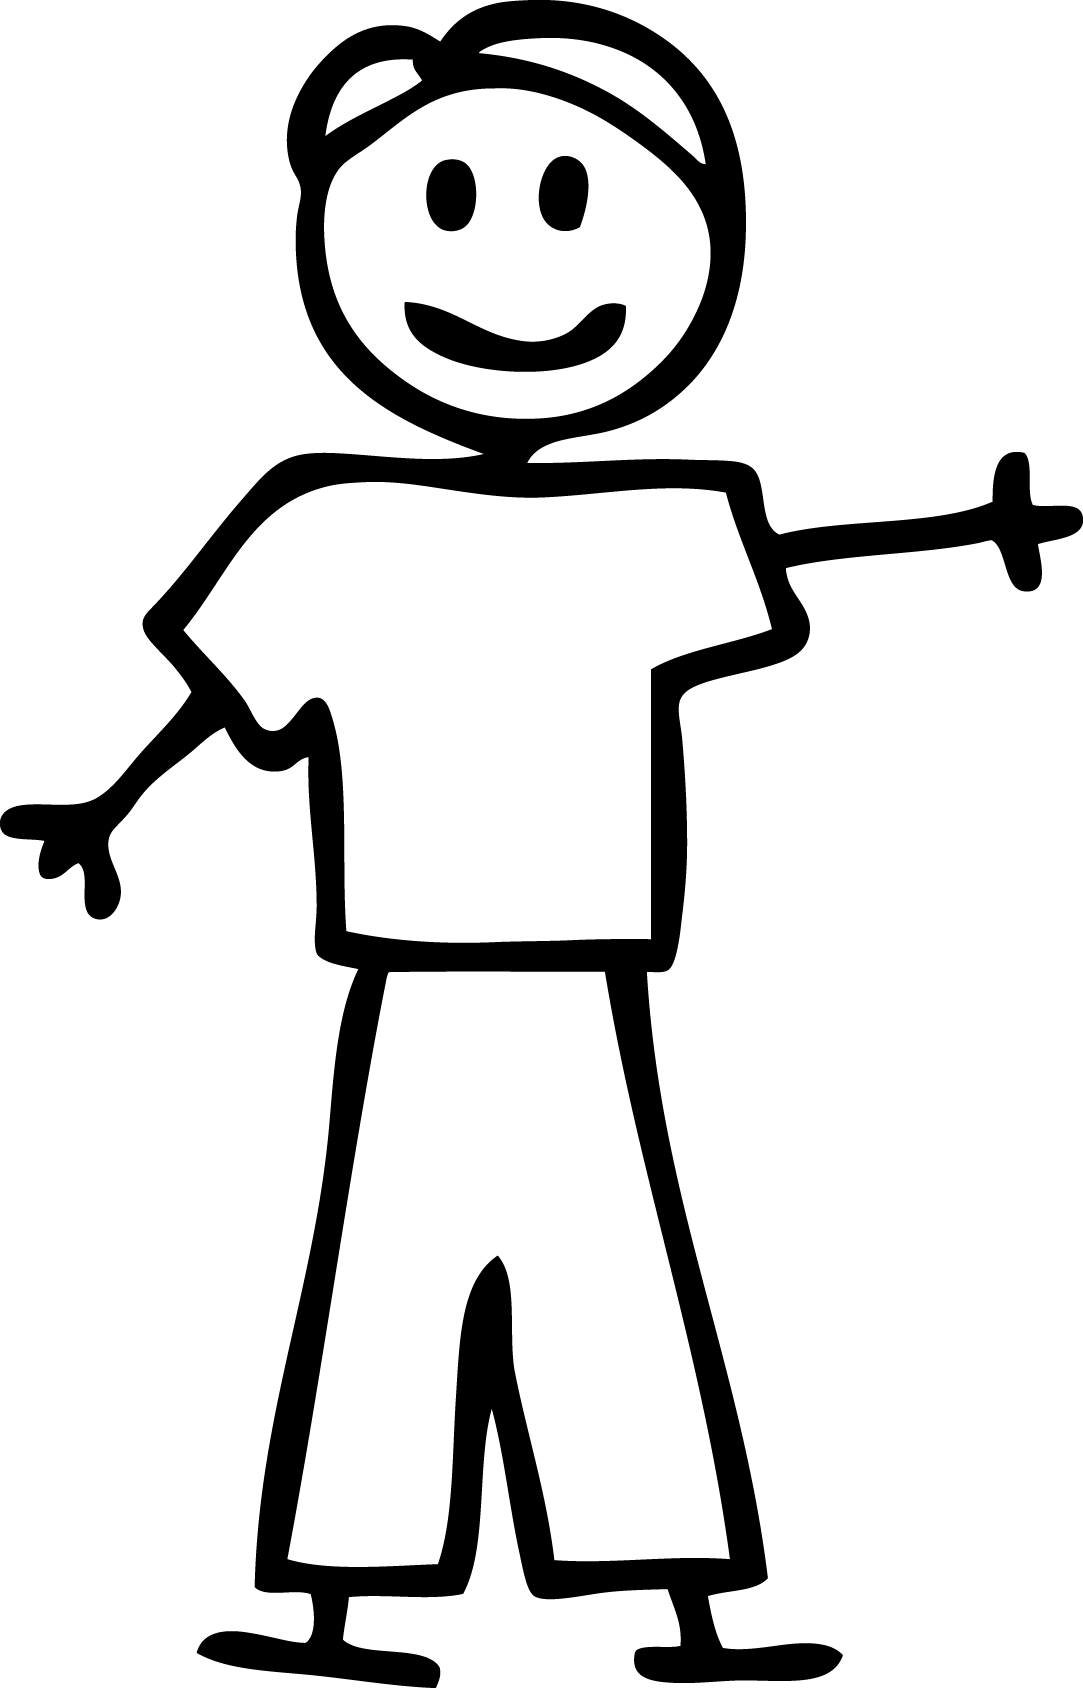 free-stick-people-download-free-stick-people-png-images-free-cliparts